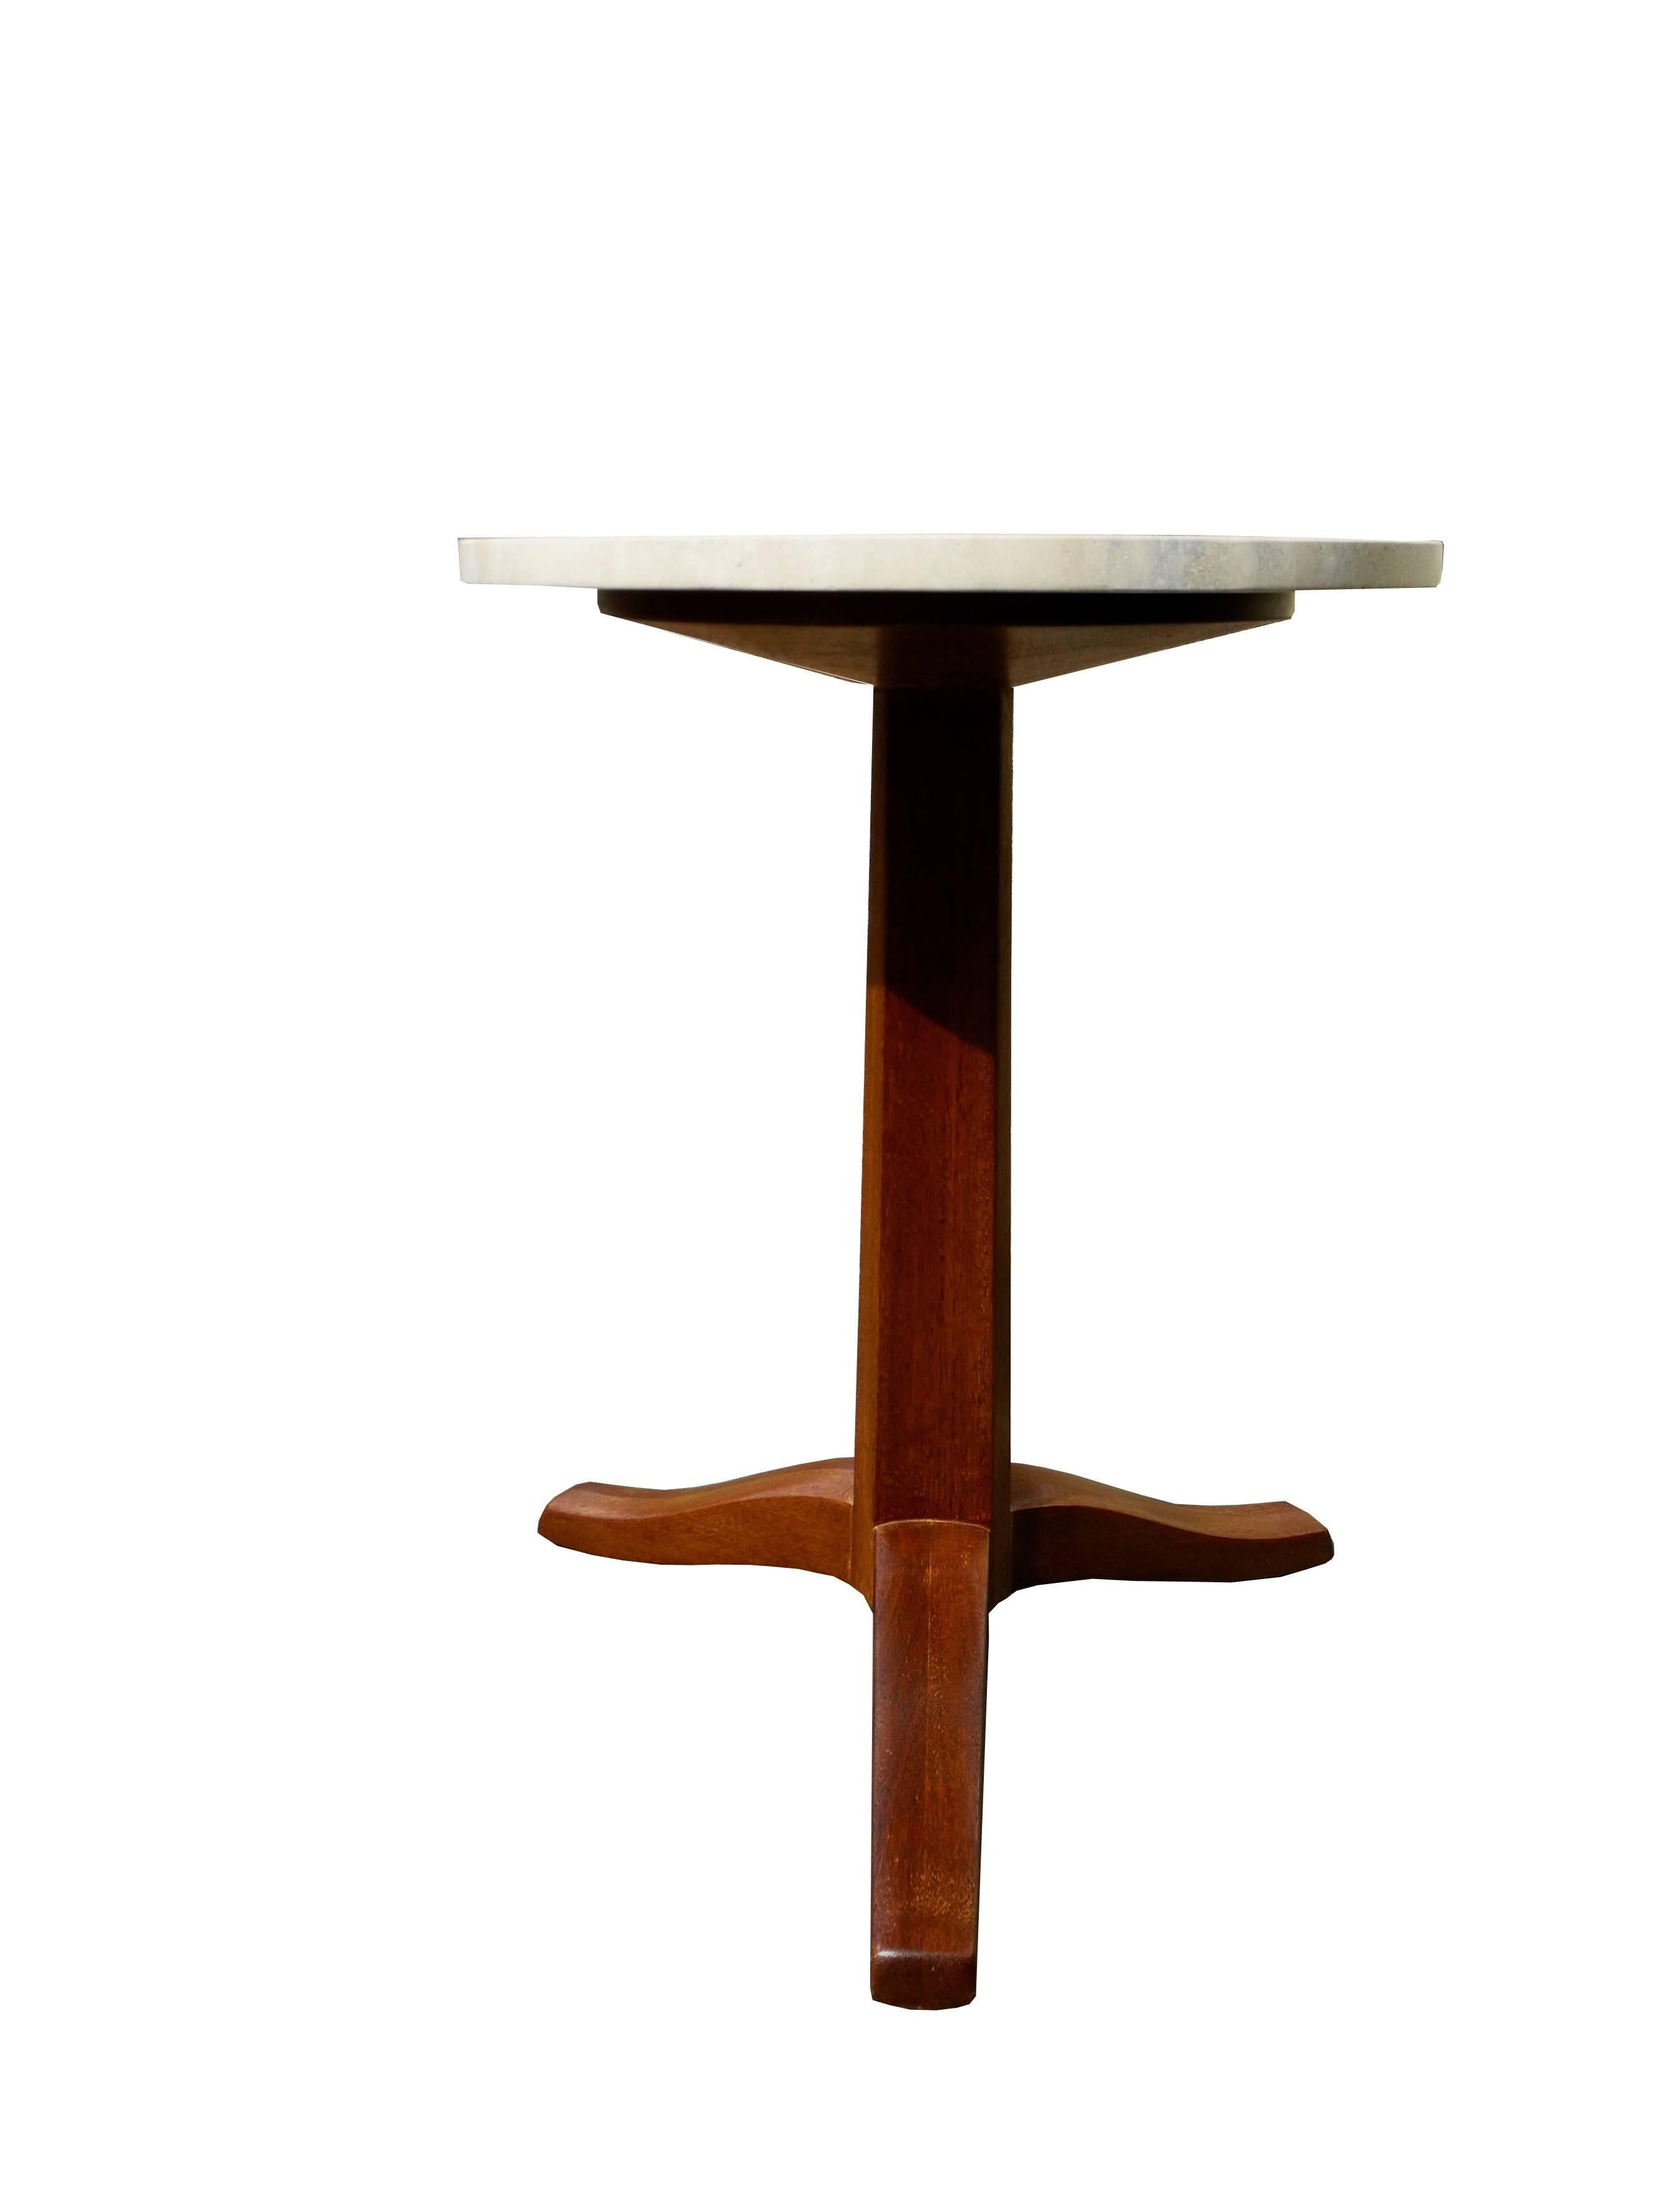 This mahogany gueridon was designed by Edward Wormley in the 1950s for Dunbar Furniture.

